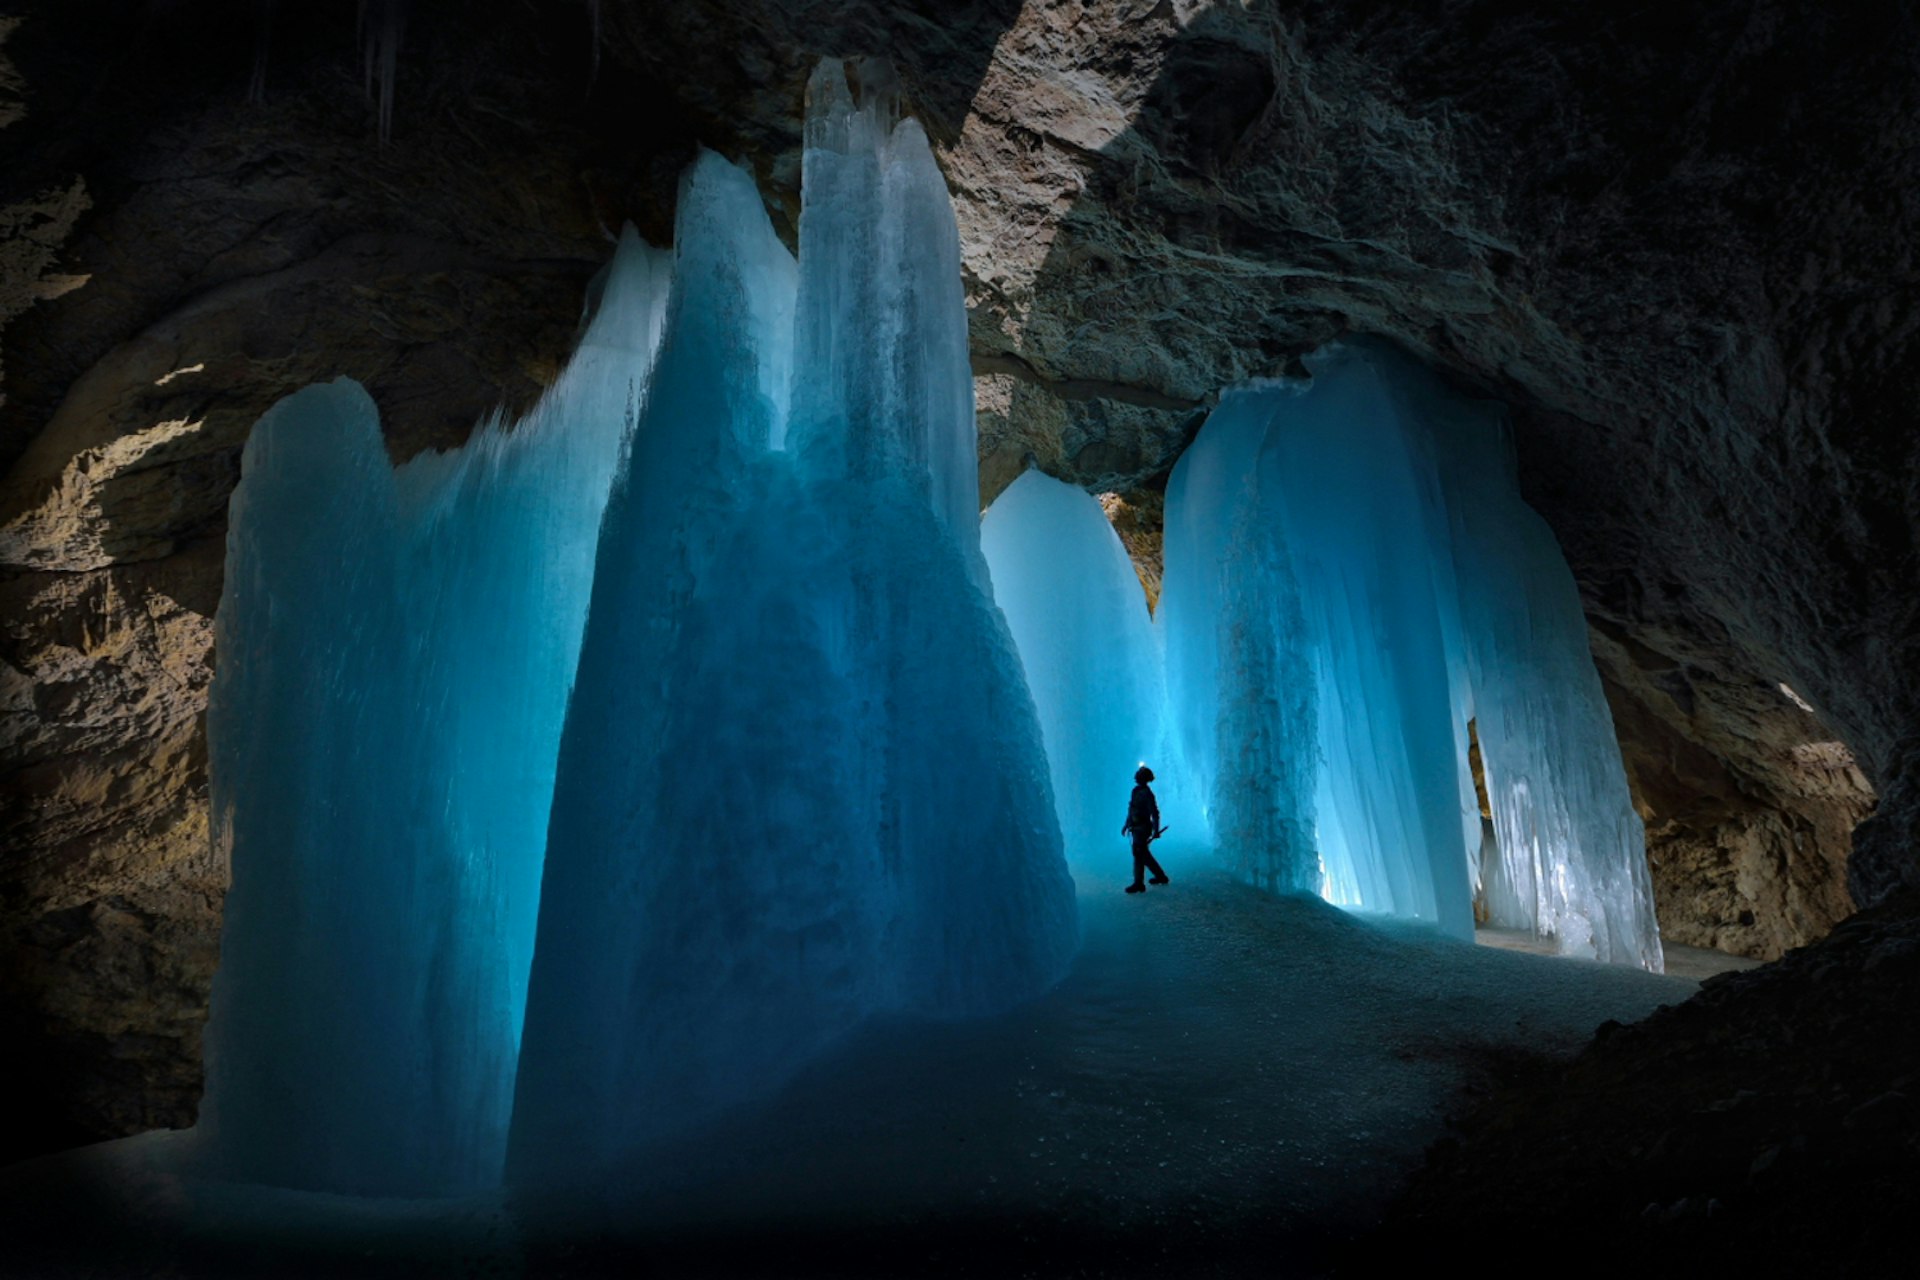 Large ice formations inside Eiskgel hhle near Werfenweng